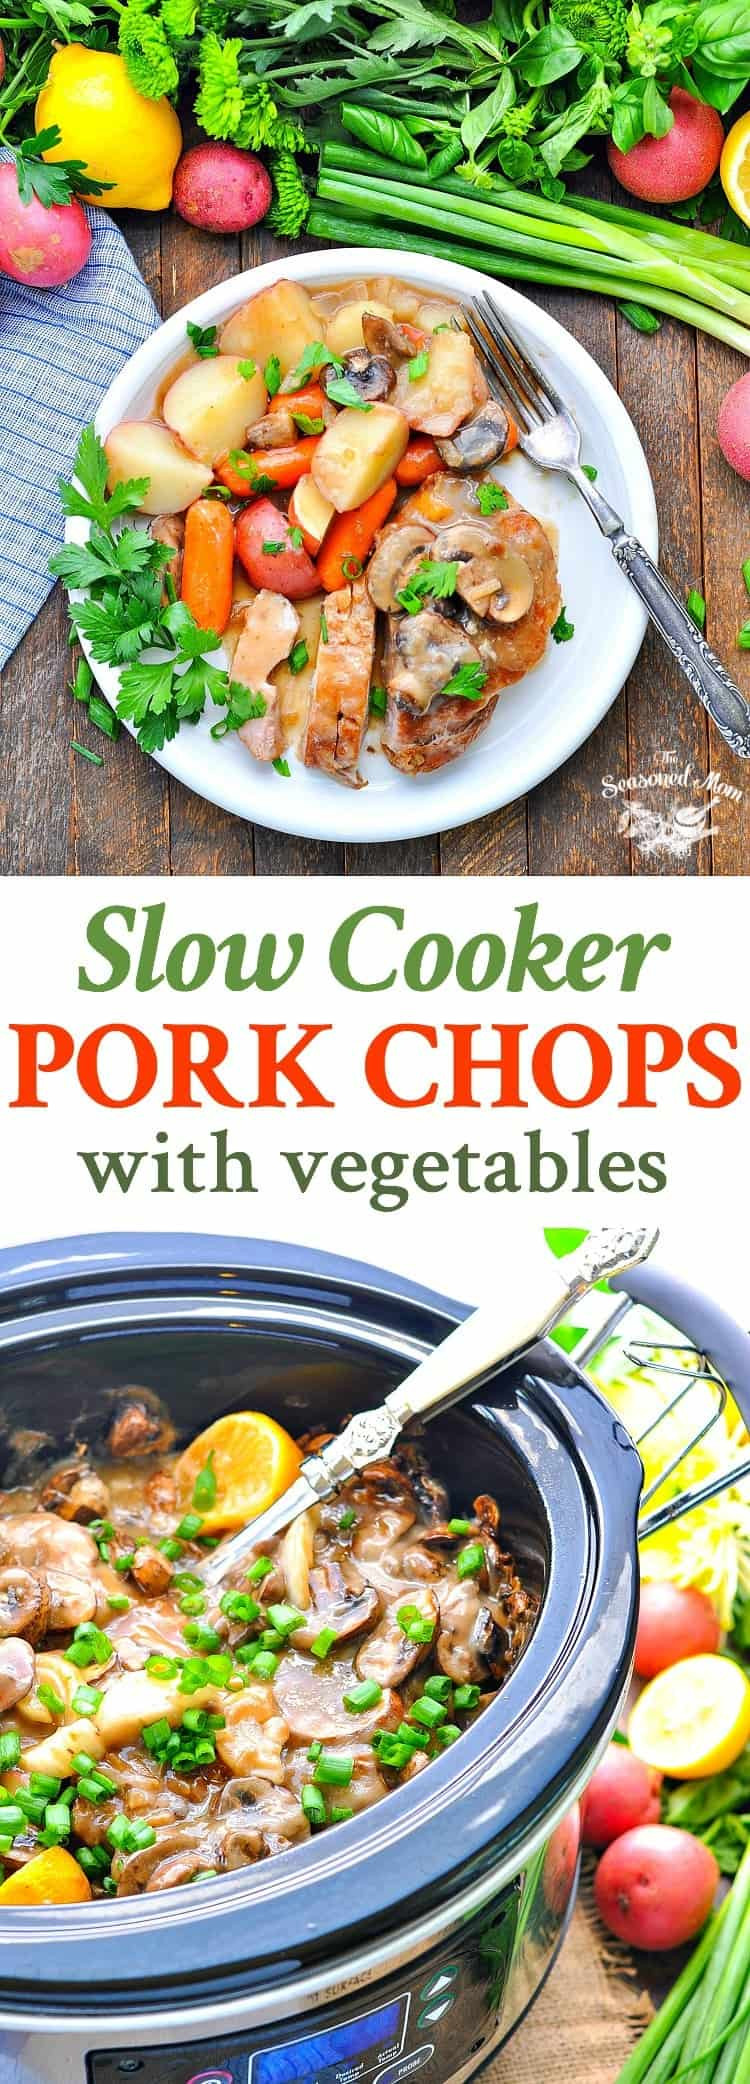 Pork Chops And Vegetables
 Slow Cooker Pork Chops with Ve ables and Gravy The